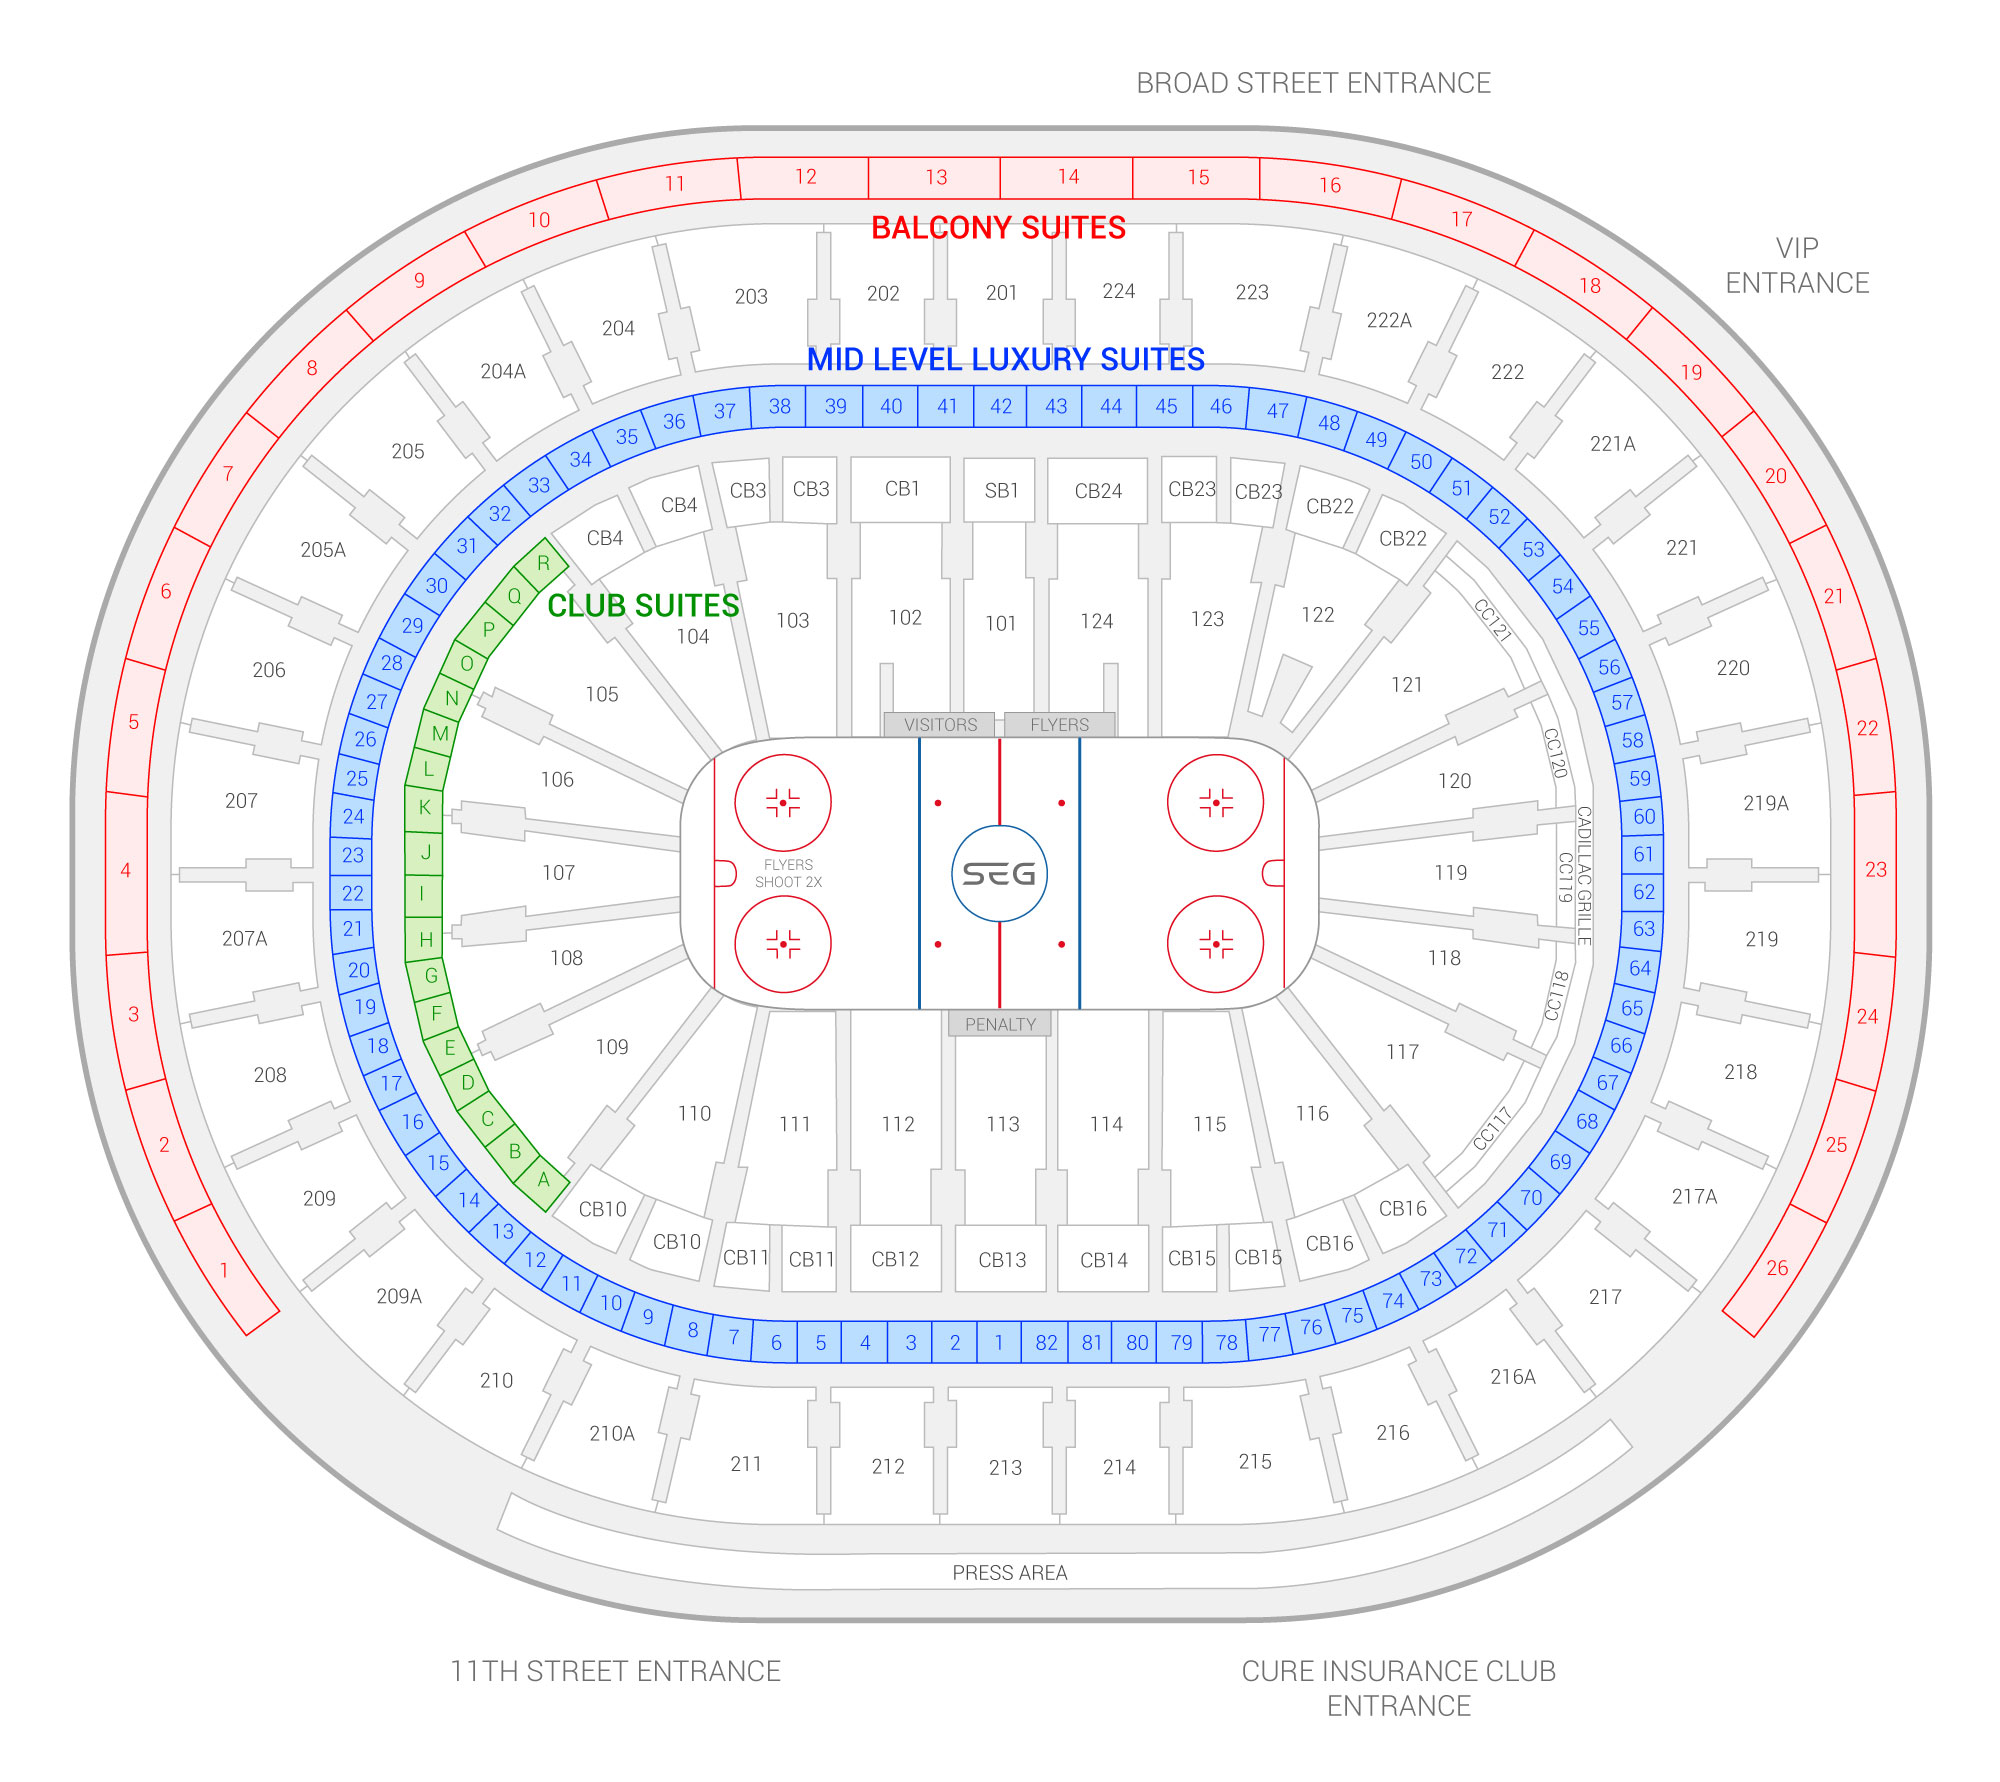 Wells Fargo Center / Philadelphia Flyers Suite Map and Seating Chart